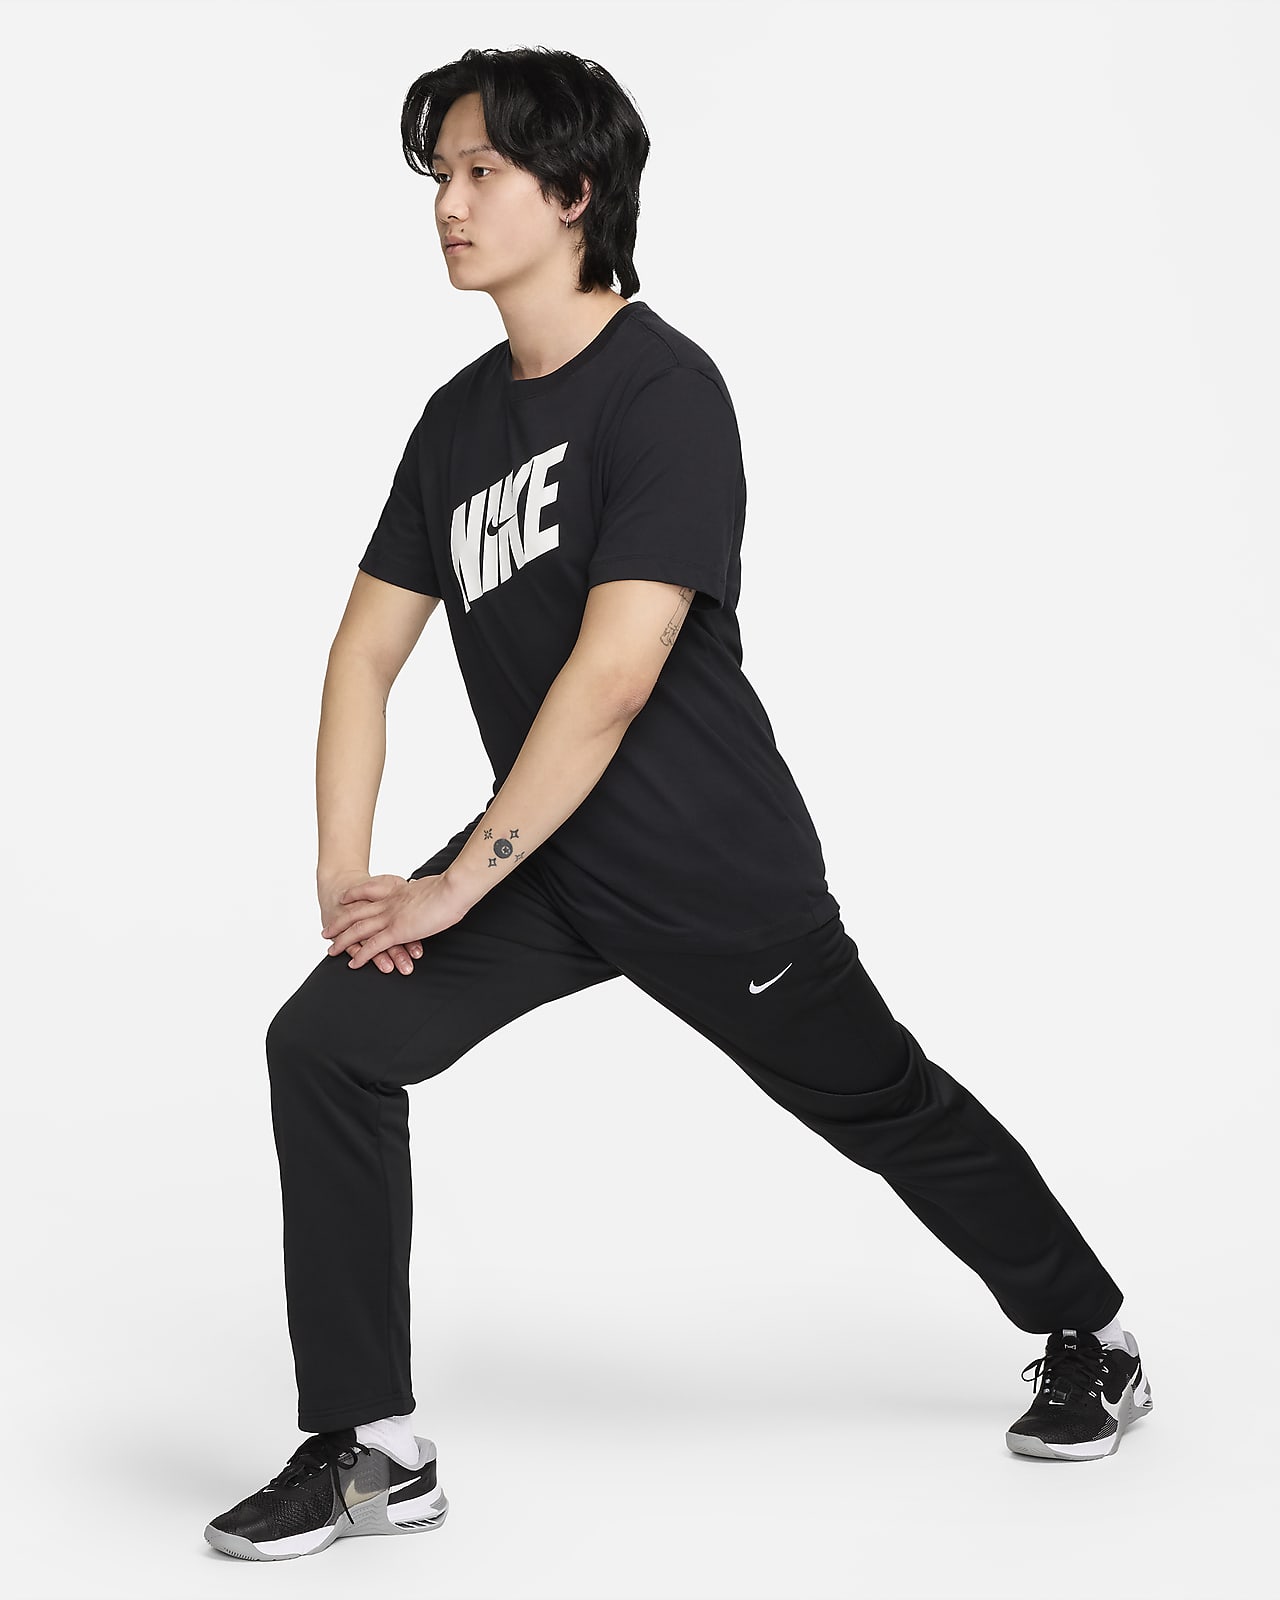 Nike Therma-FIT Men's Fitness Pants